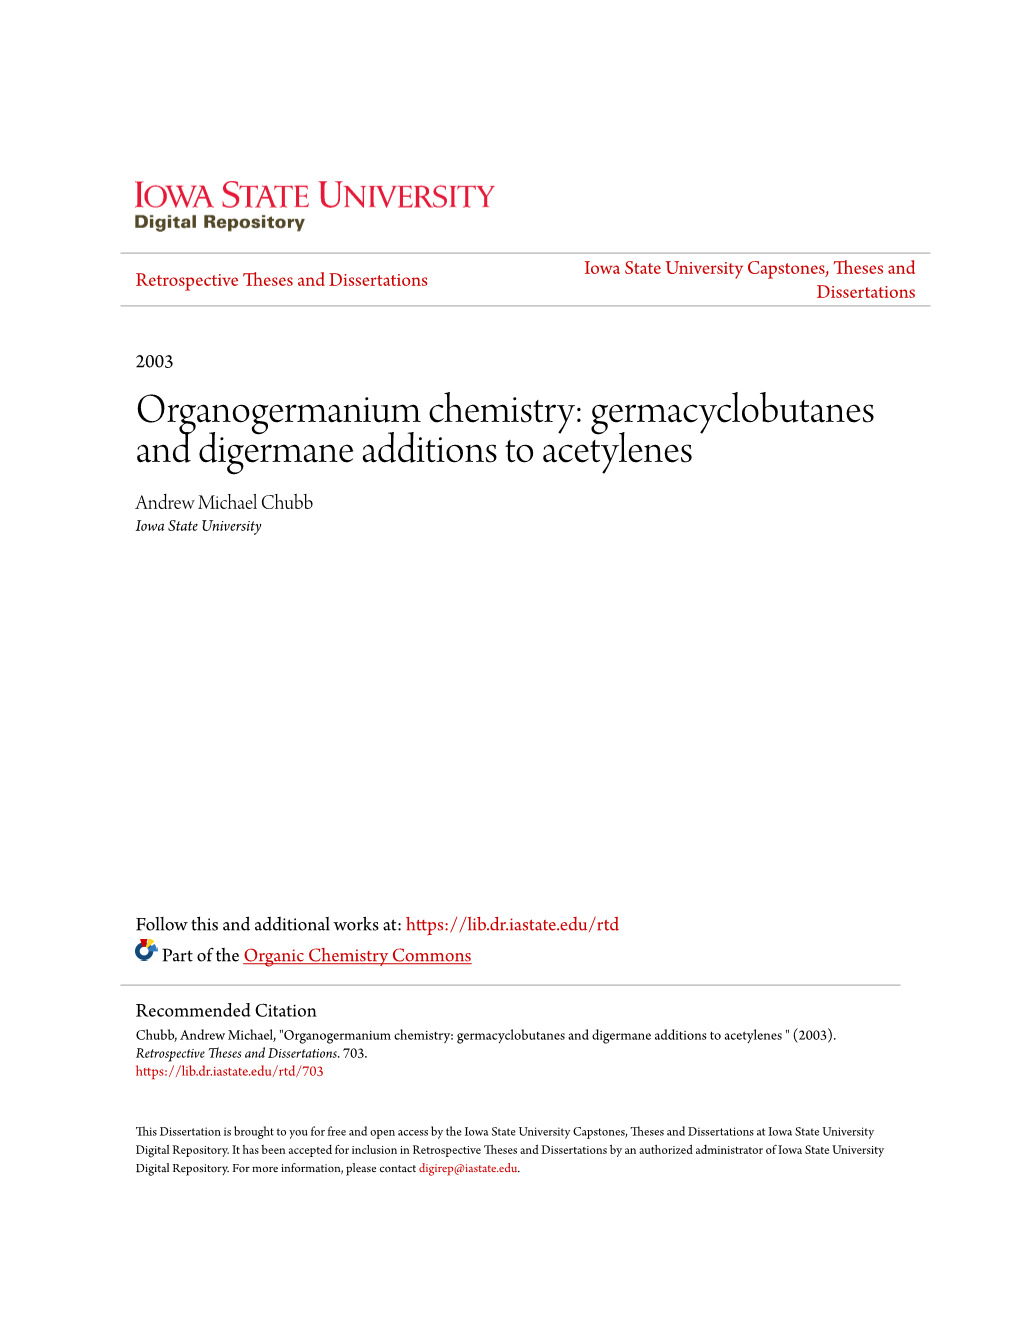 Germacyclobutanes and Digermane Additions to Acetylenes Andrew Michael Chubb Iowa State University